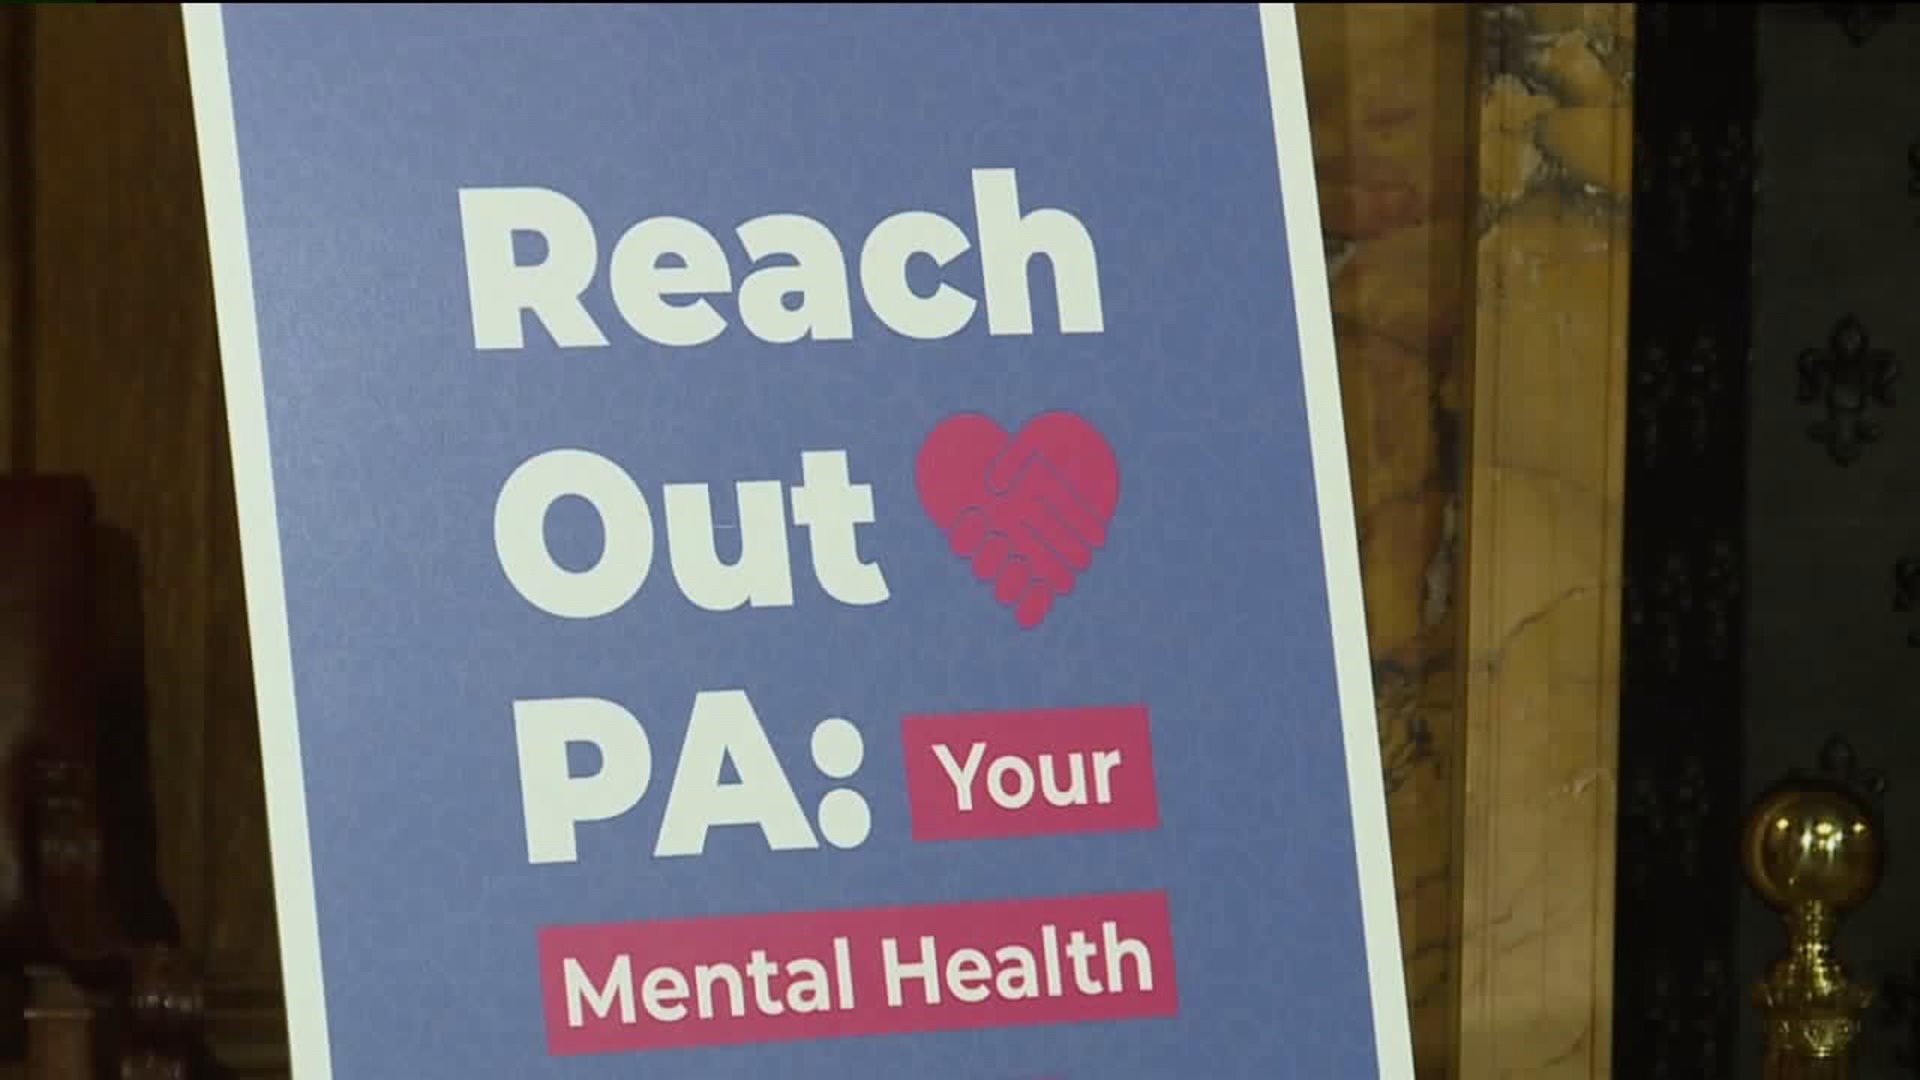 Governor Says `Reach Out PA` For Mental Health Help